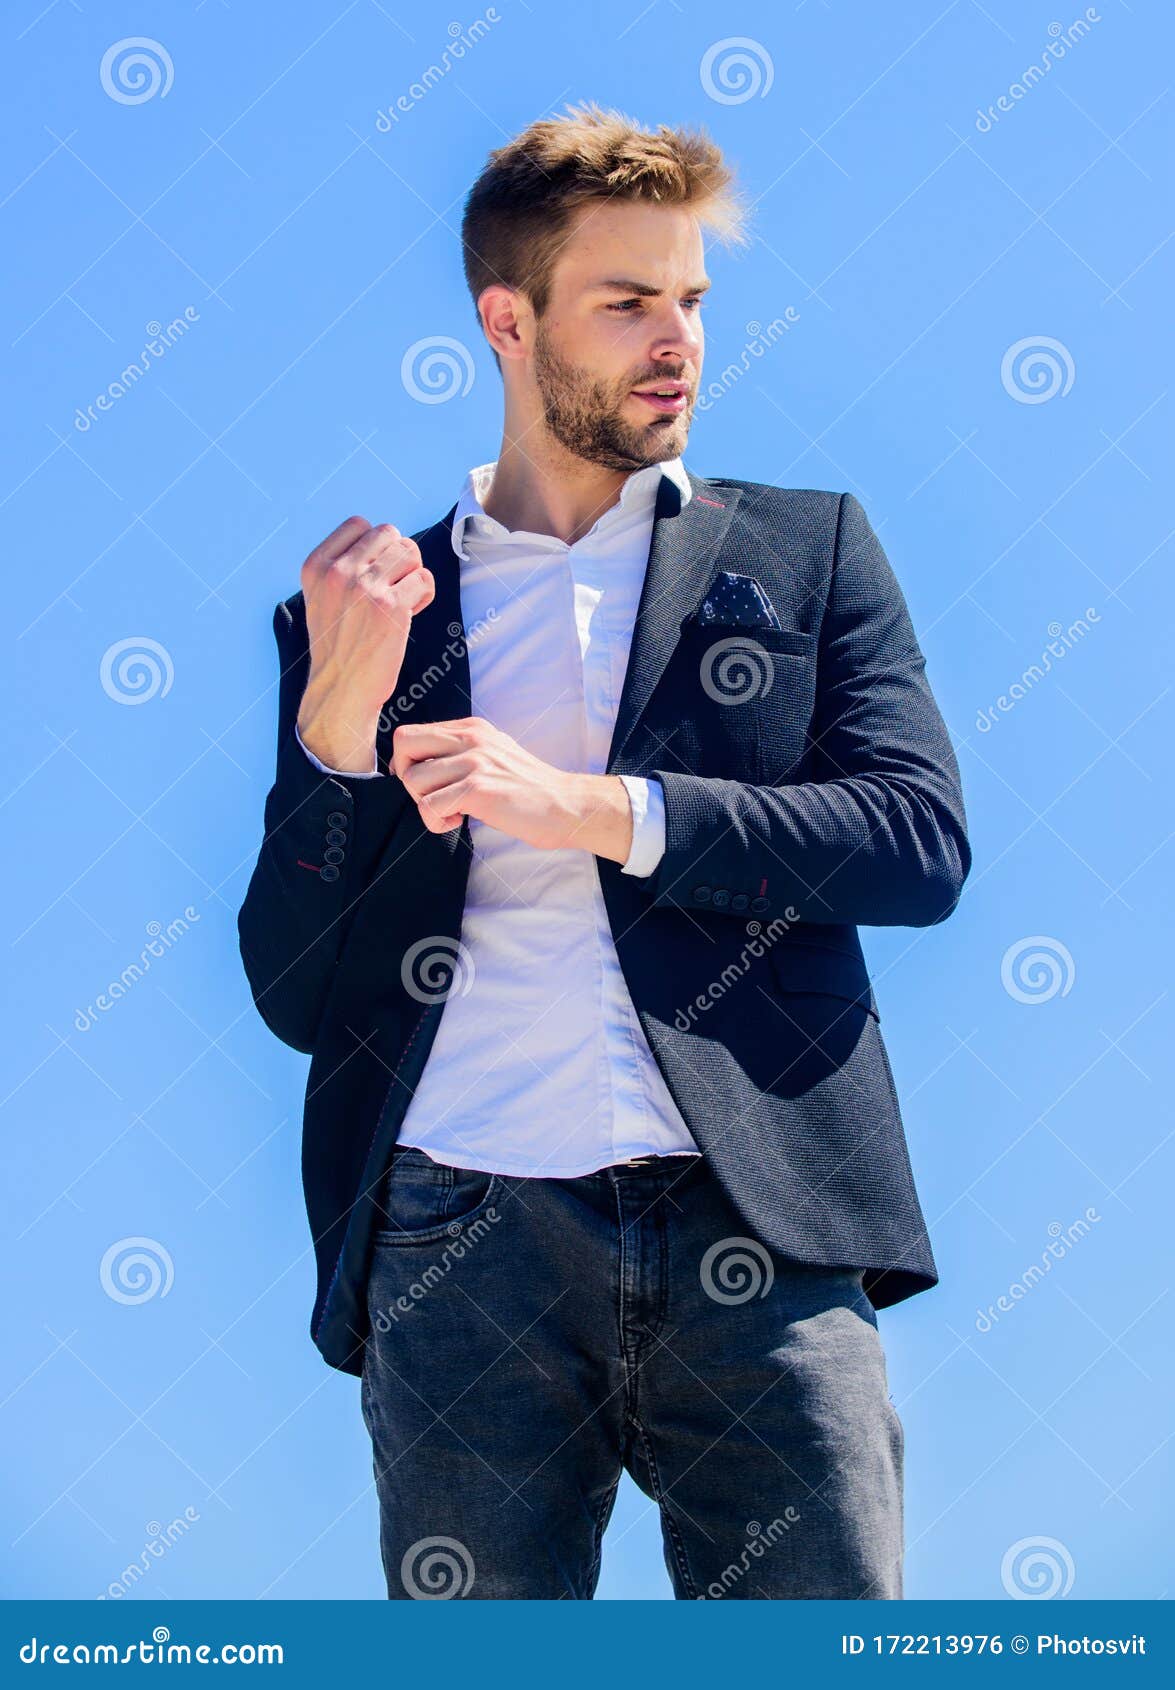 male fashion. formal style. confident handsome businessman. handsome man fashion model. looking impeccable. handsome guy